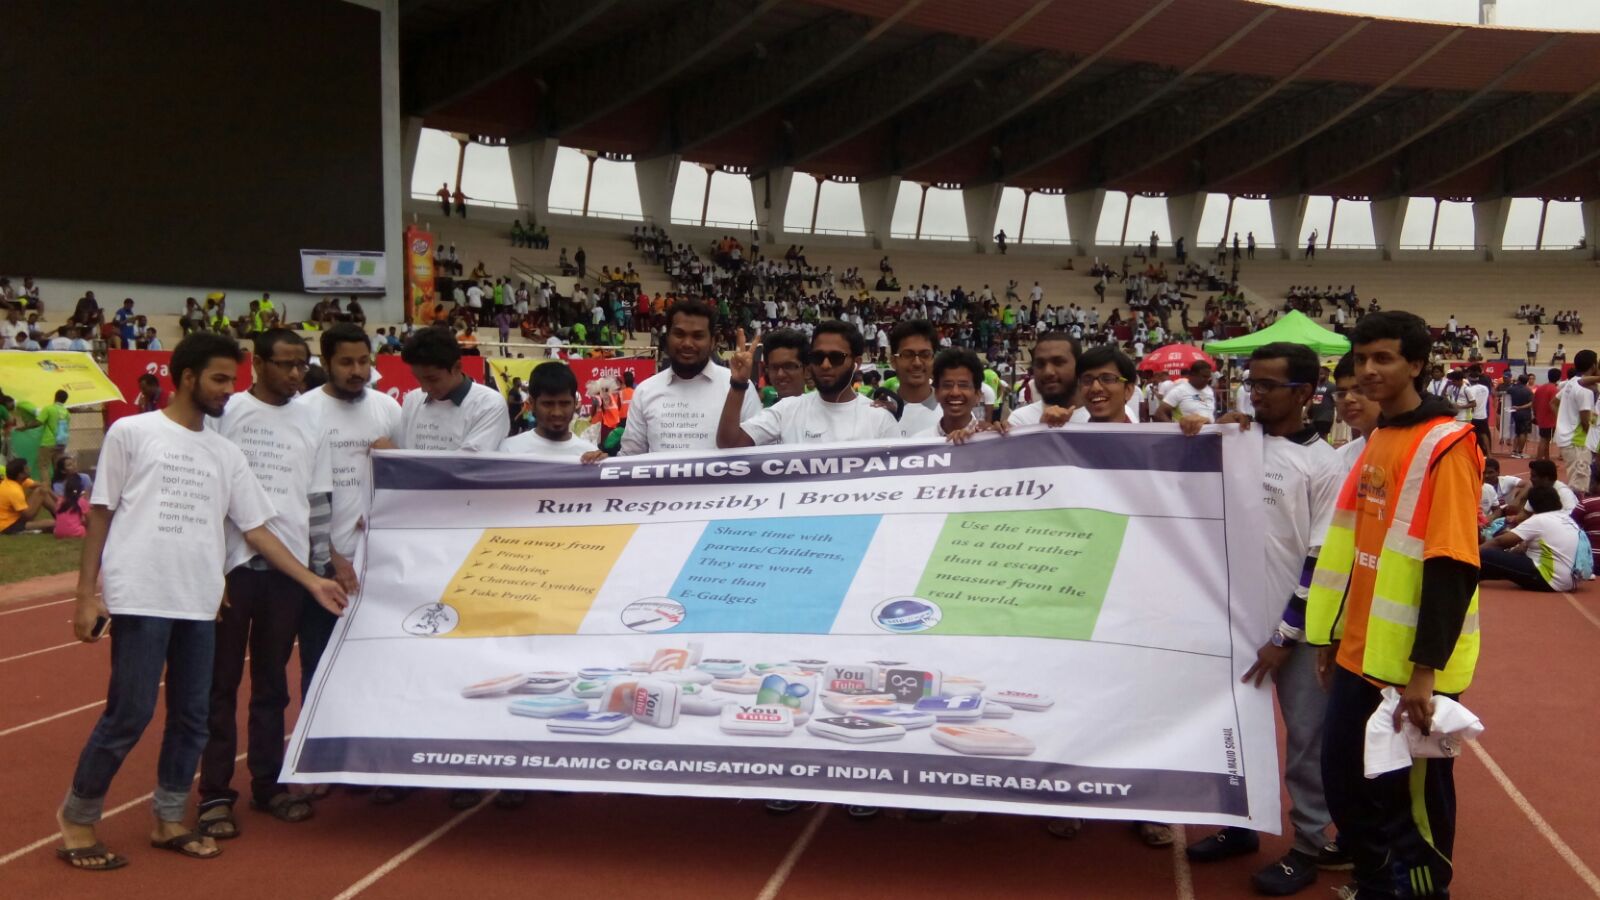 SIO join Hyderabad Marathon during e-ethics campaign